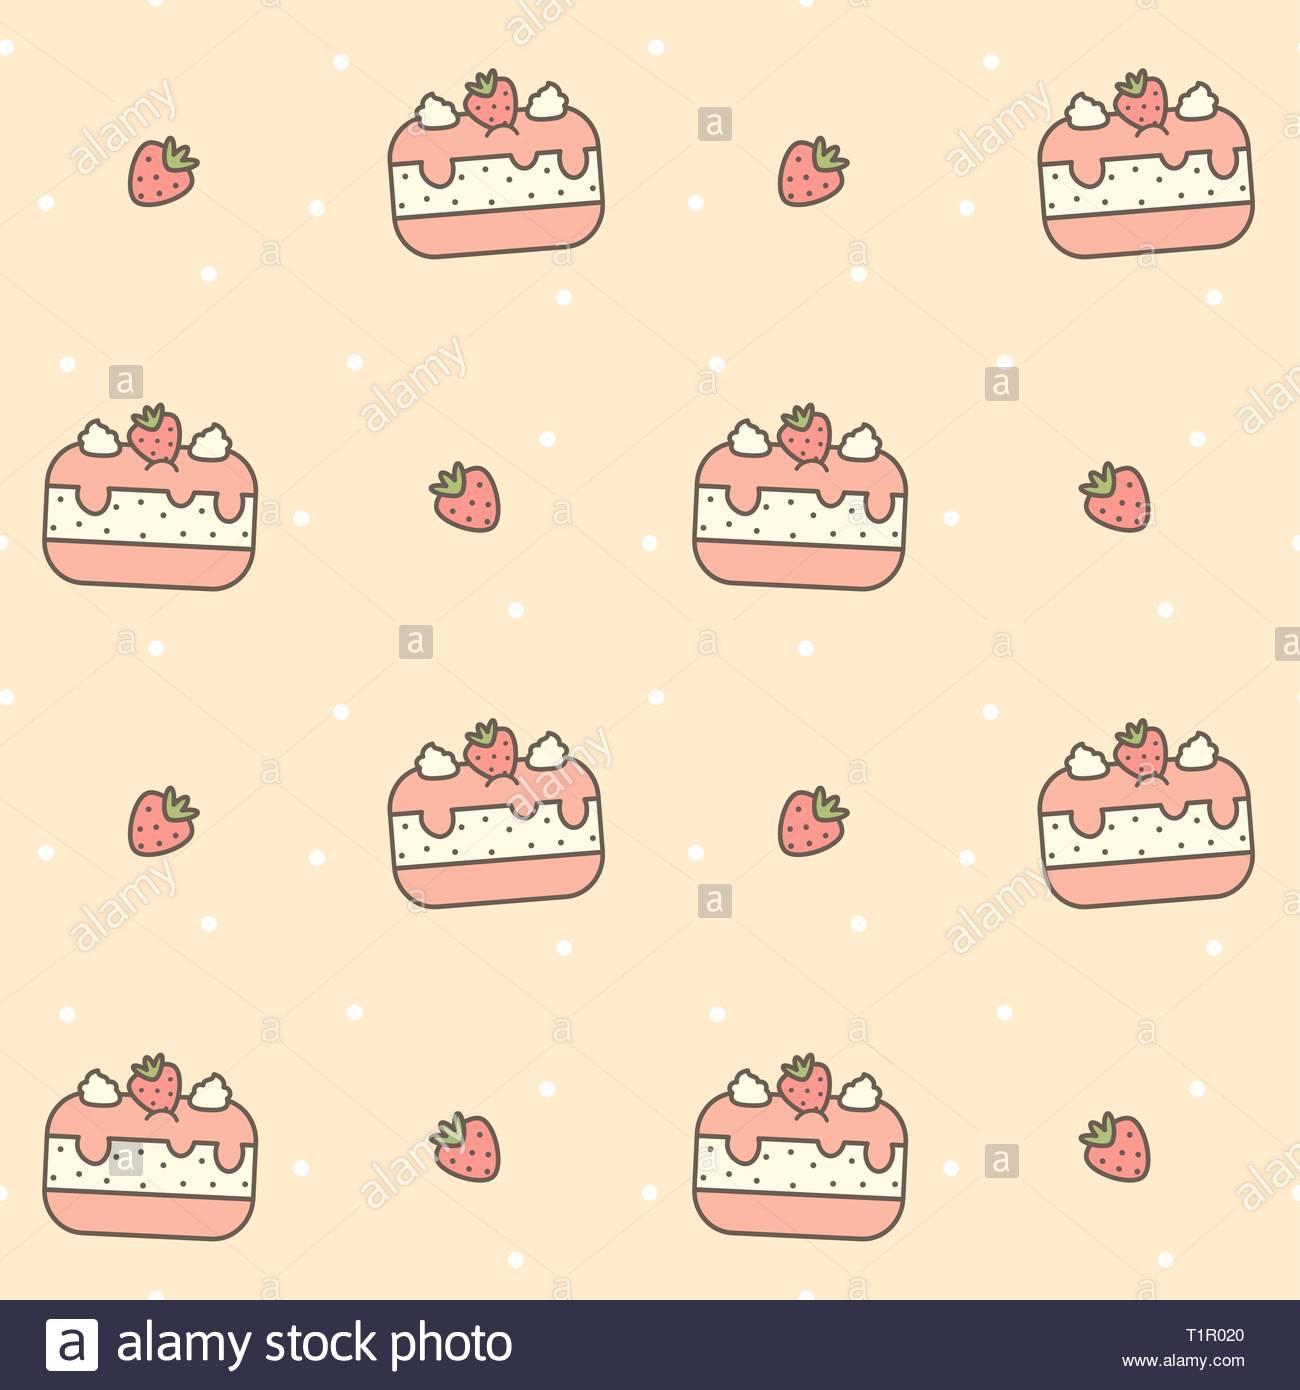 Cute Cartoon Seamless Vector Pattern Background Illustration With